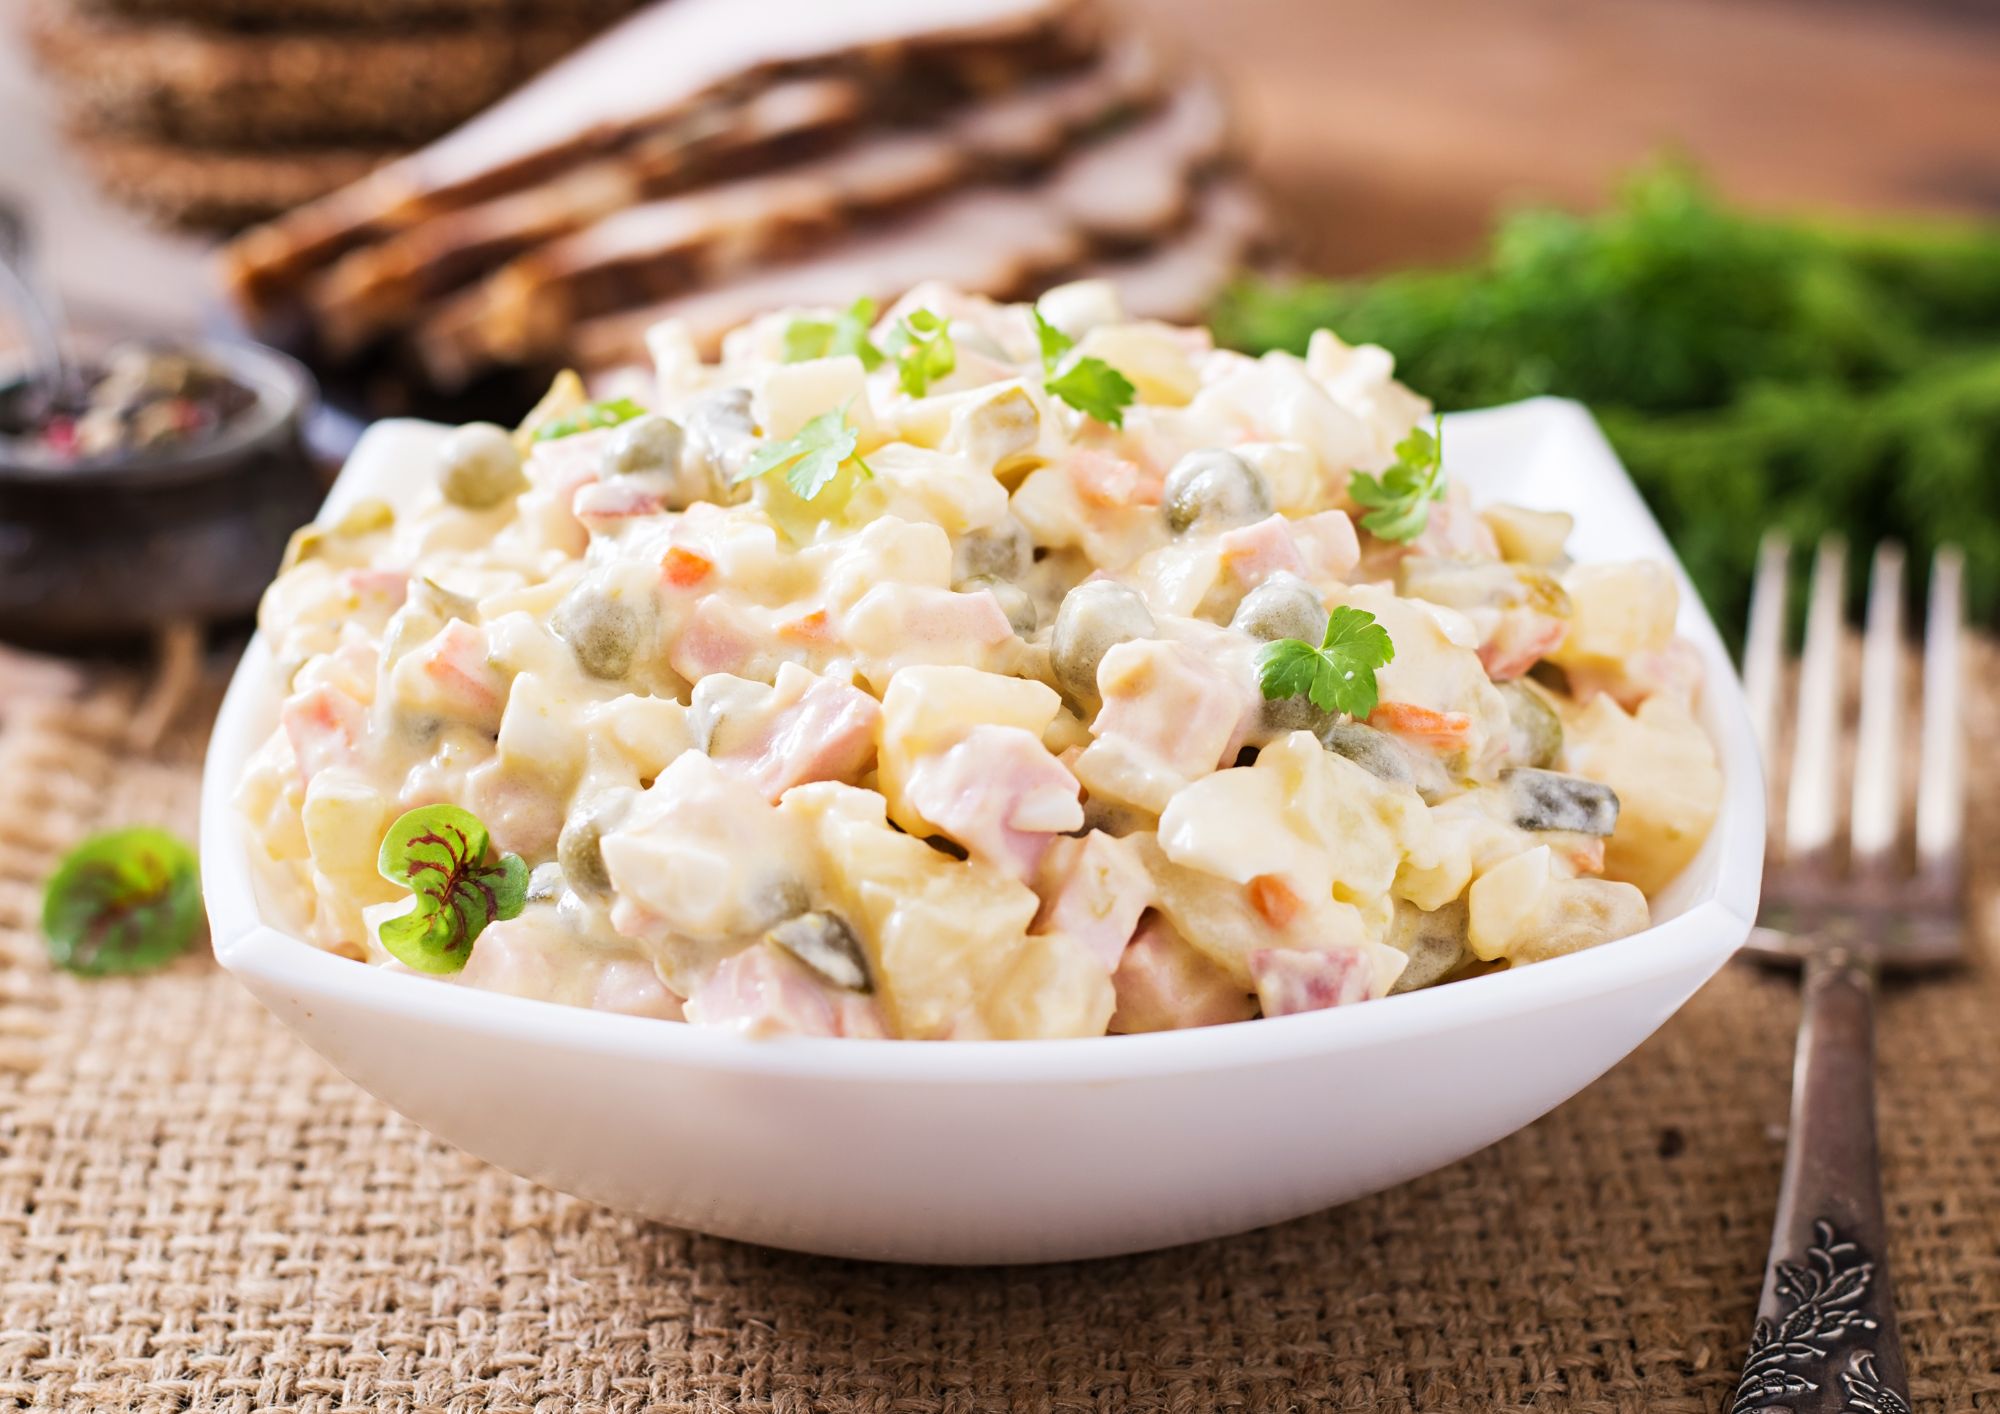 Russian salad with Twister potatoes